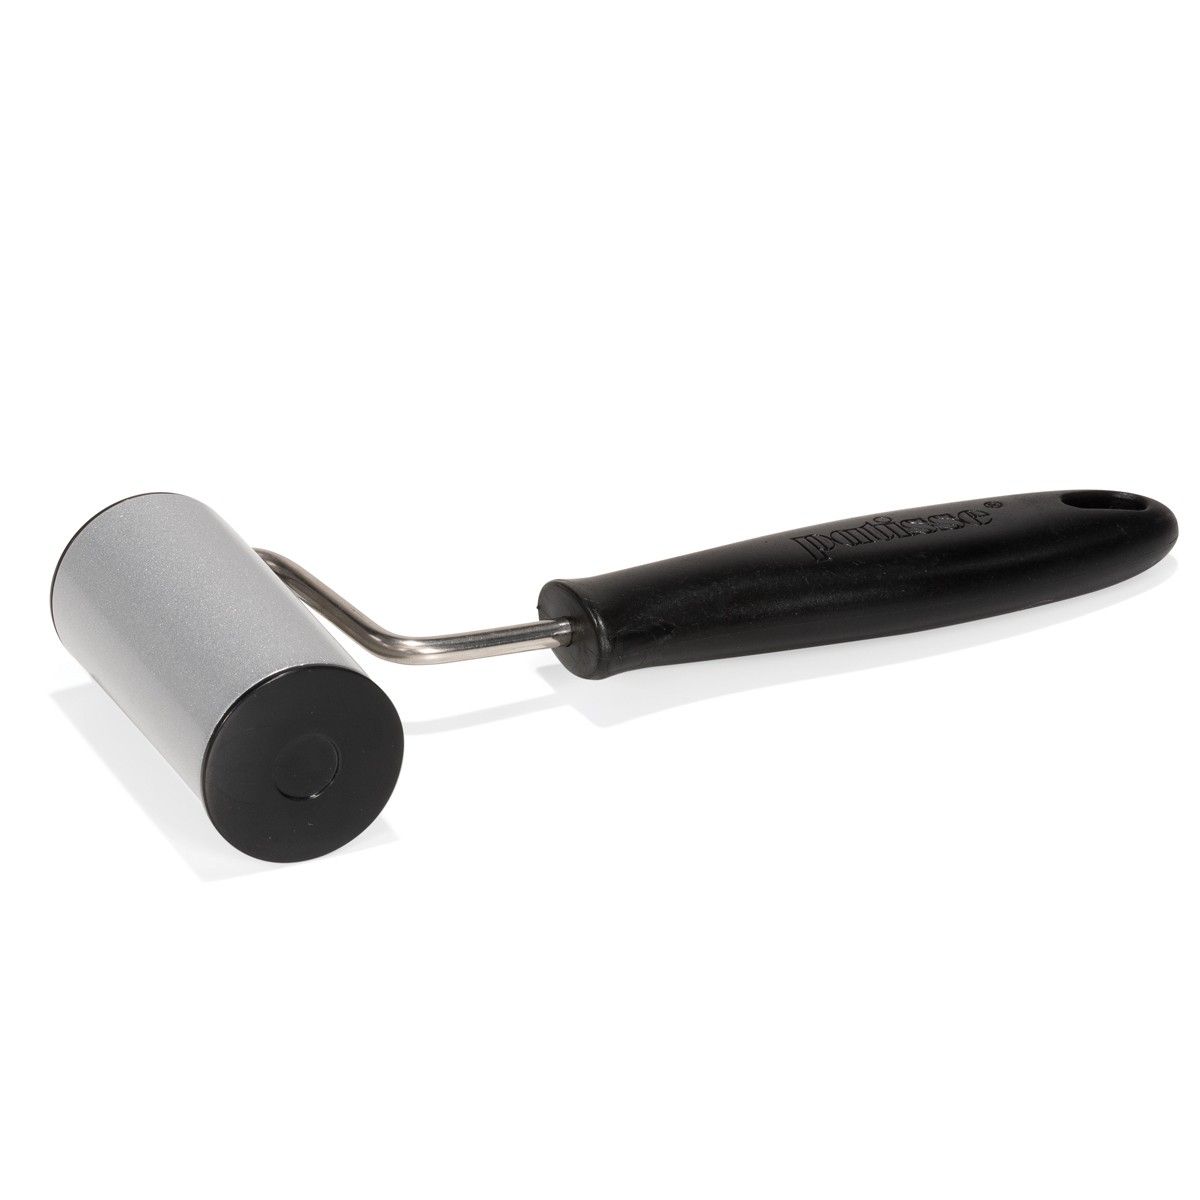 NON-STICK PASTRY ROLLER